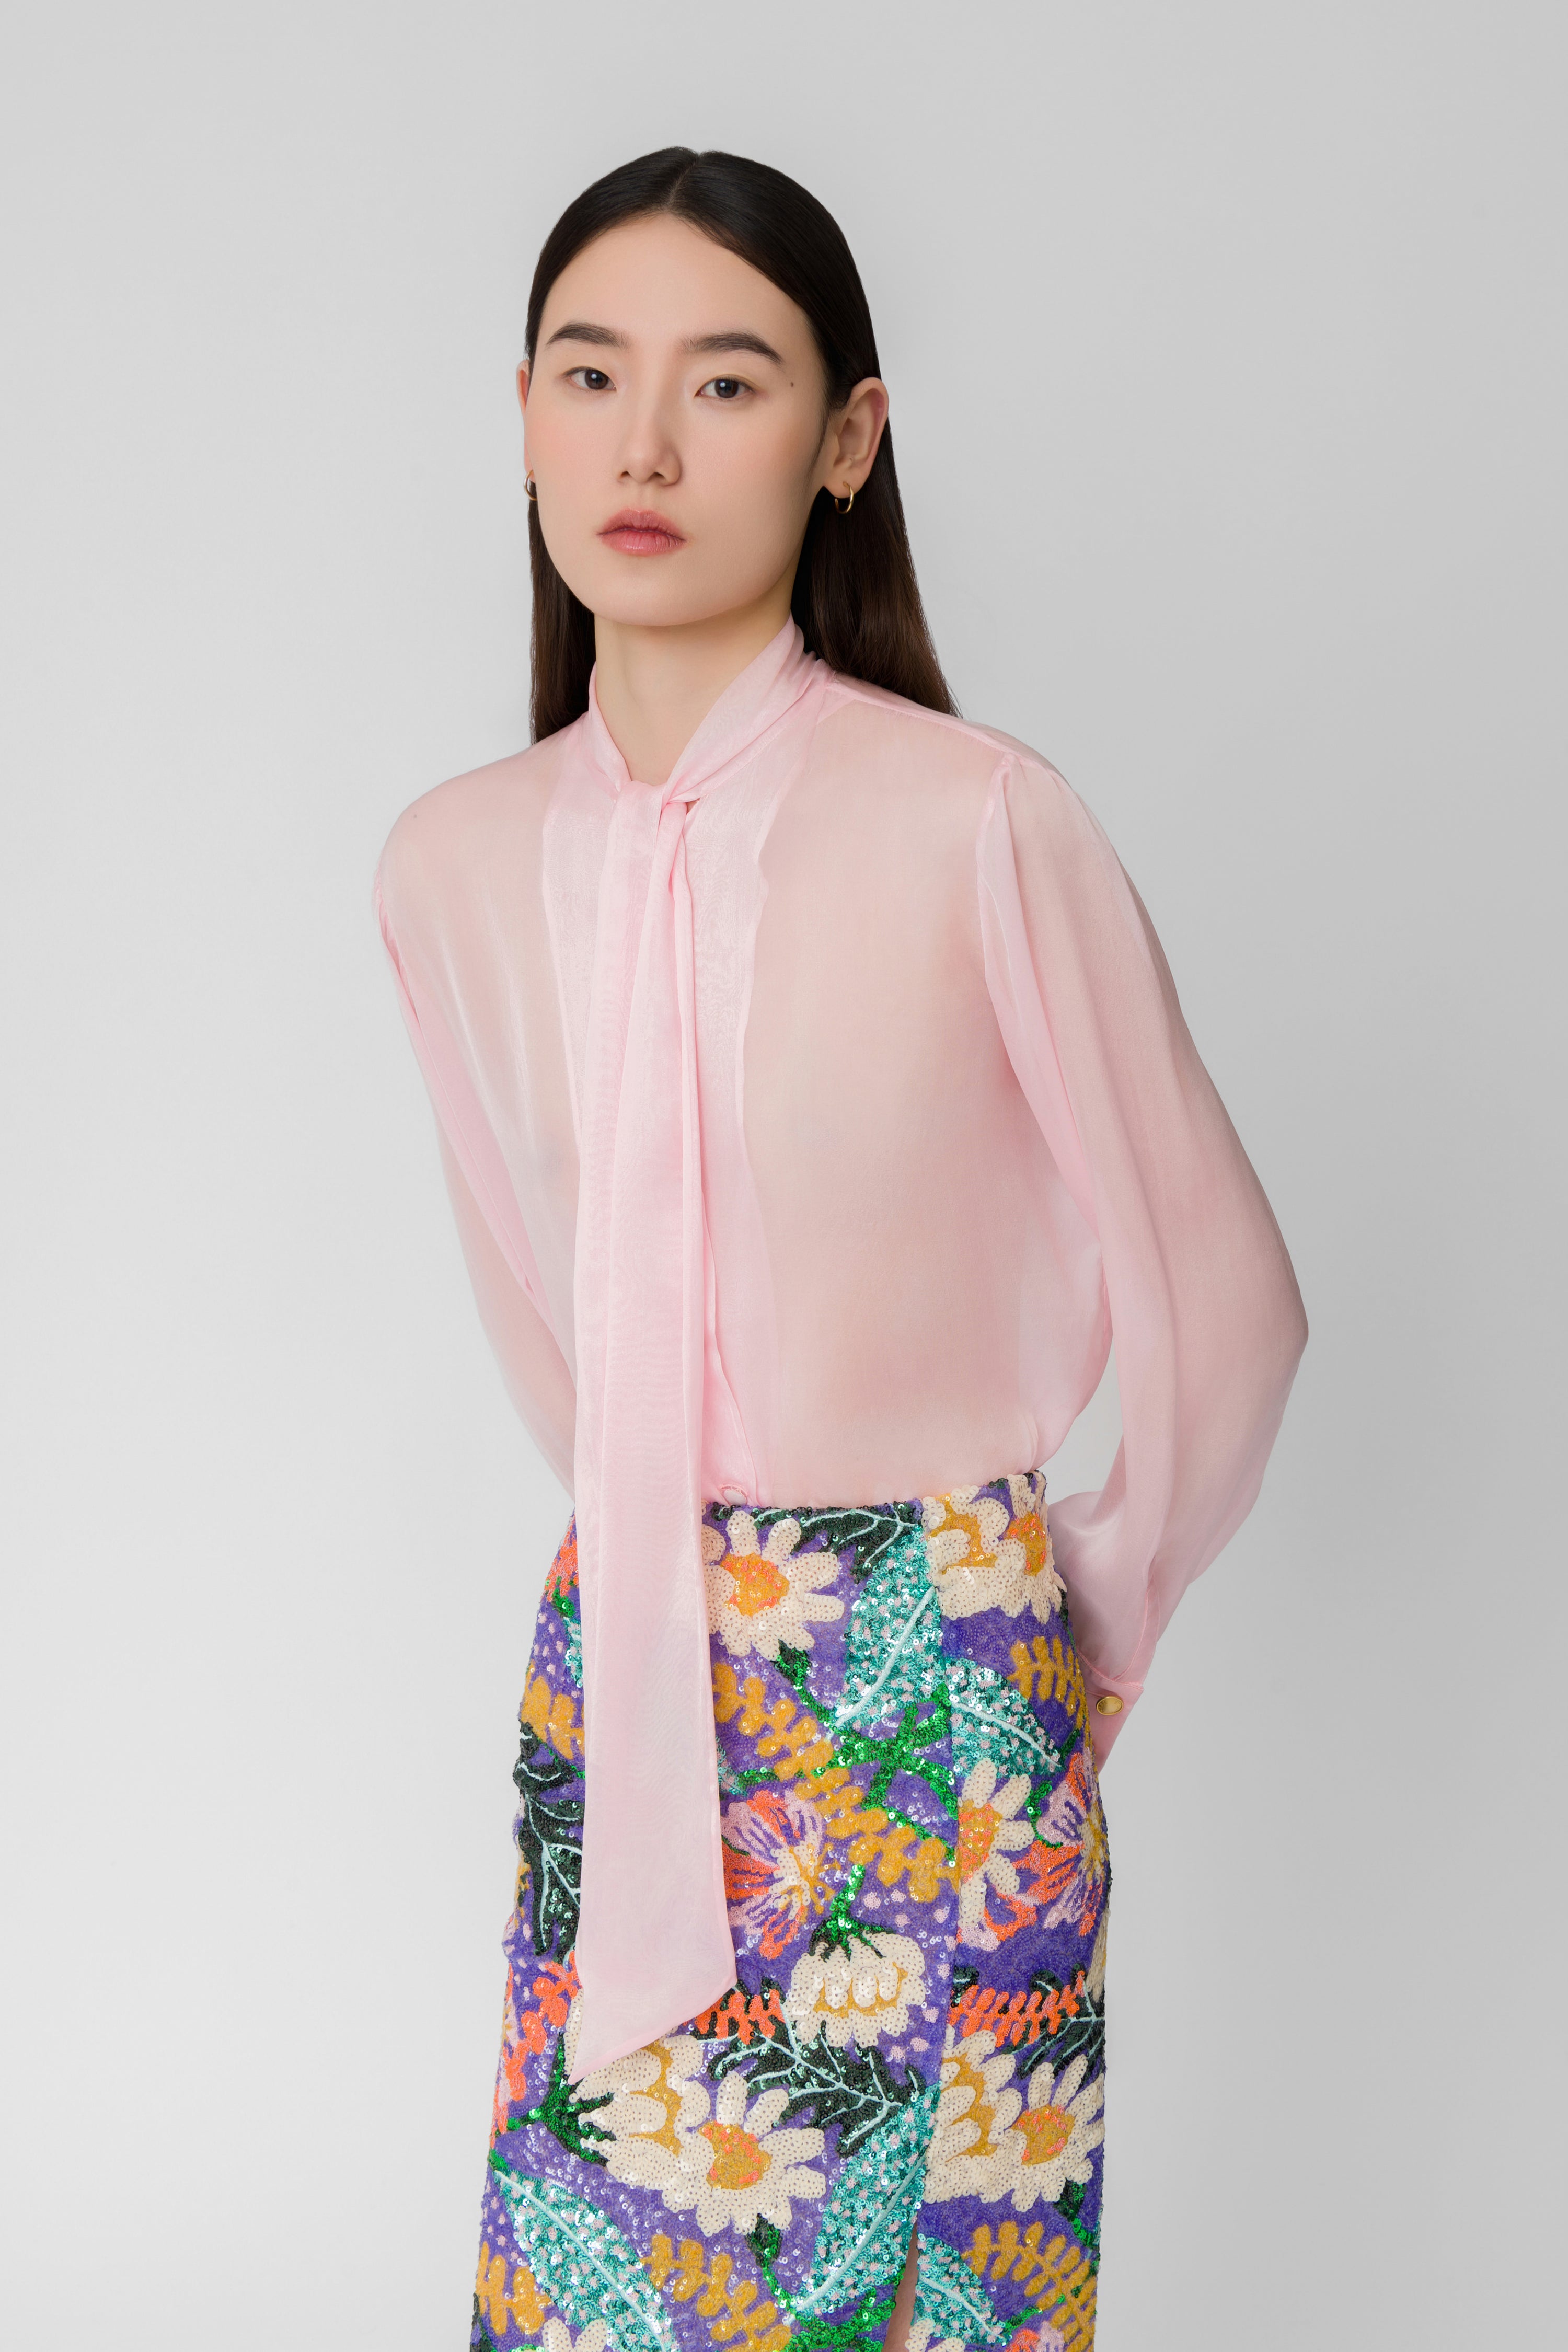 The Pink Ava Blouse